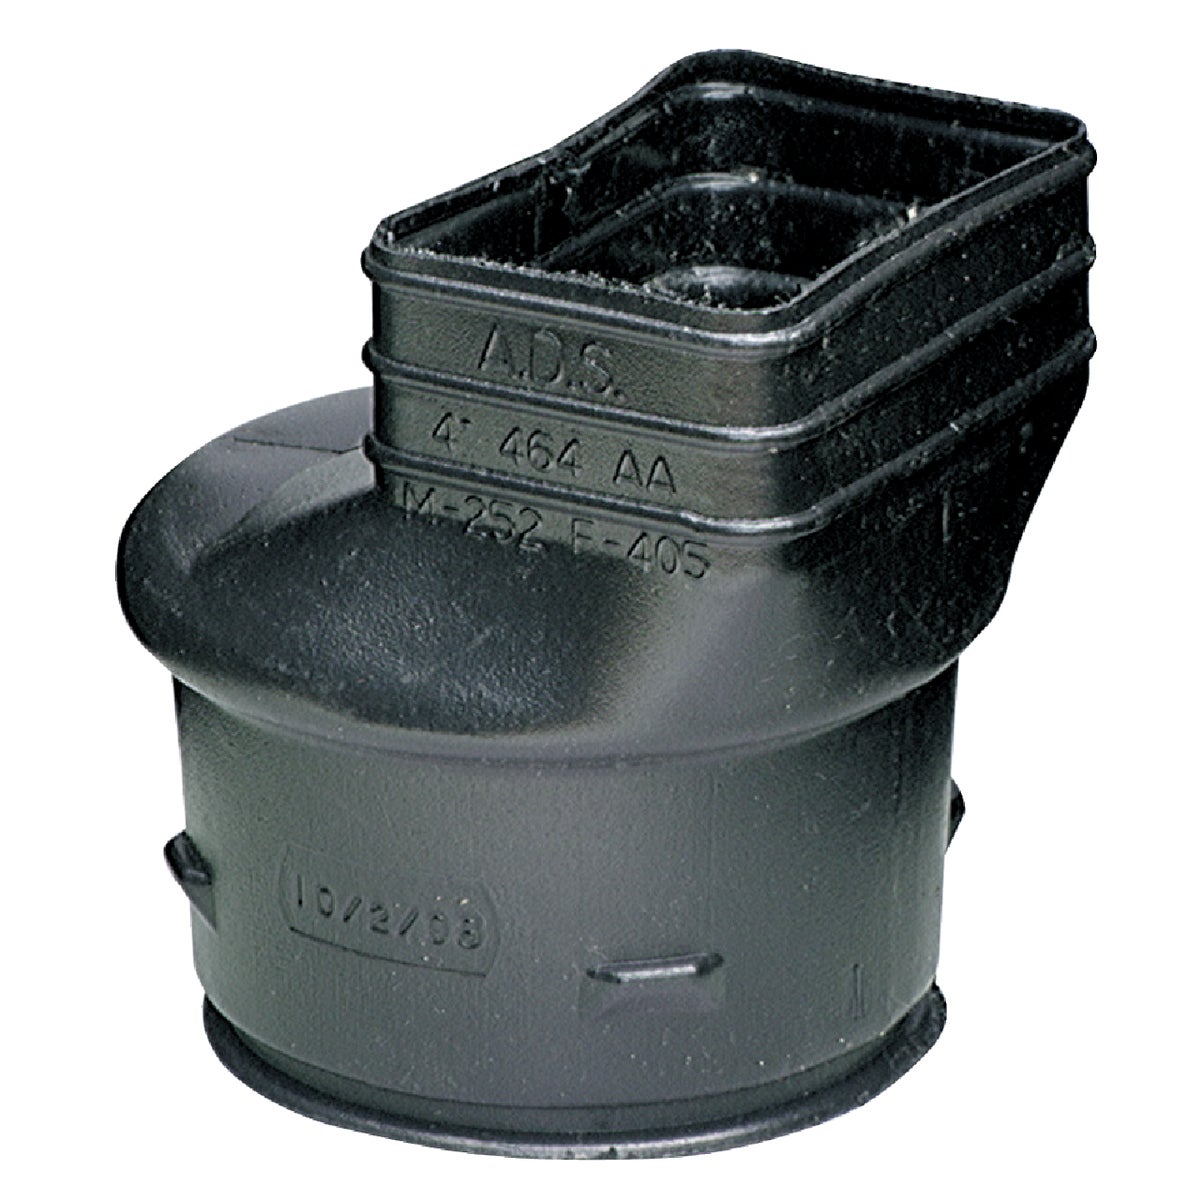 2X3 DOWNSPOUT ADAPTER